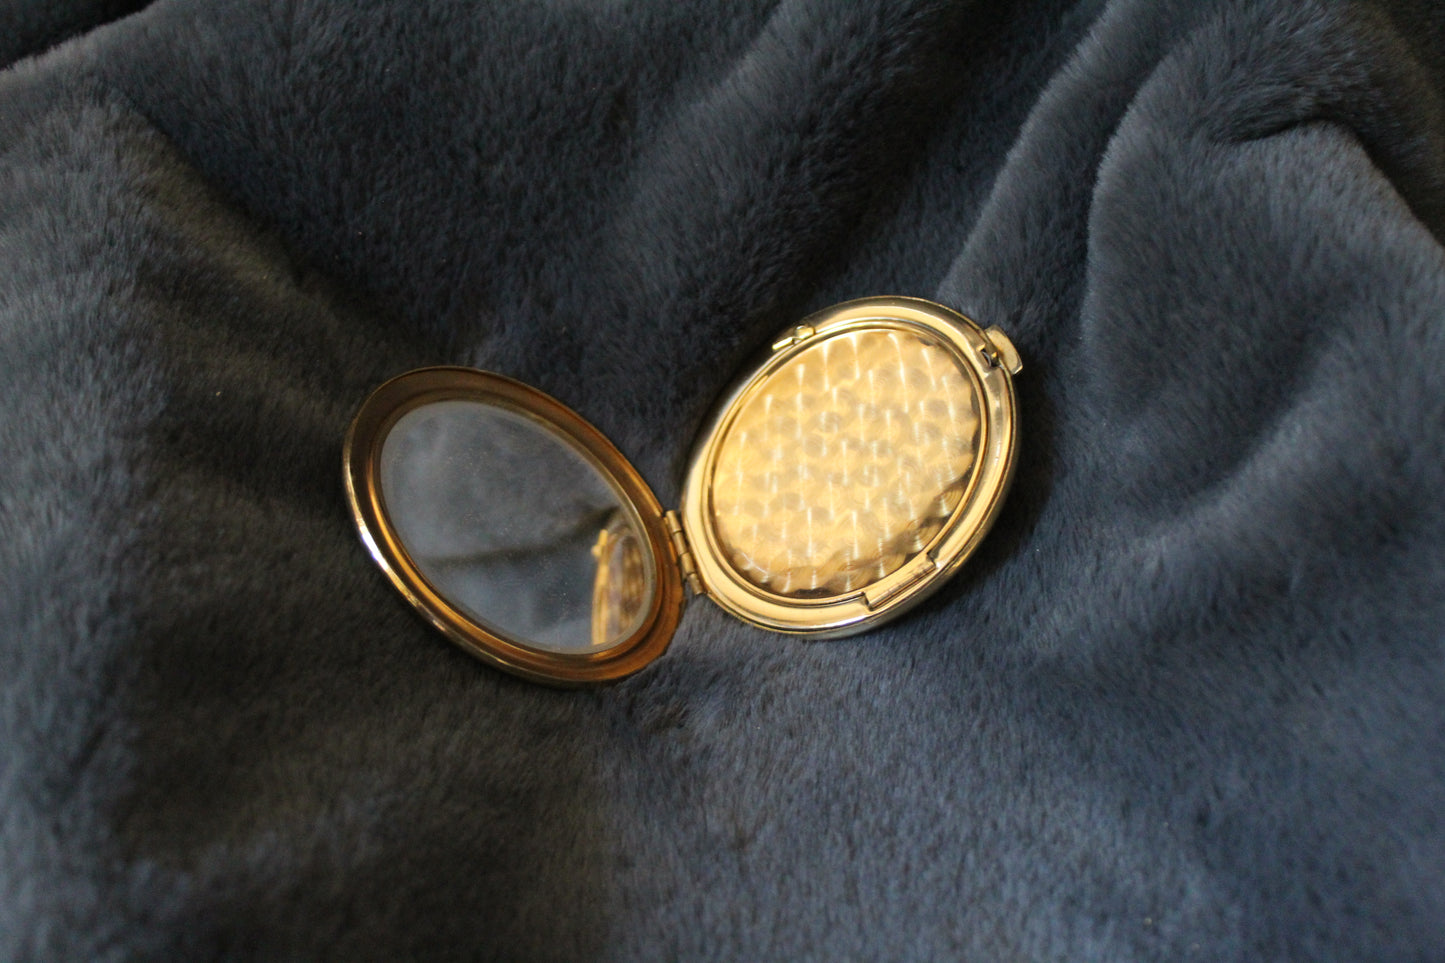 Mystery compact with dragon pattern